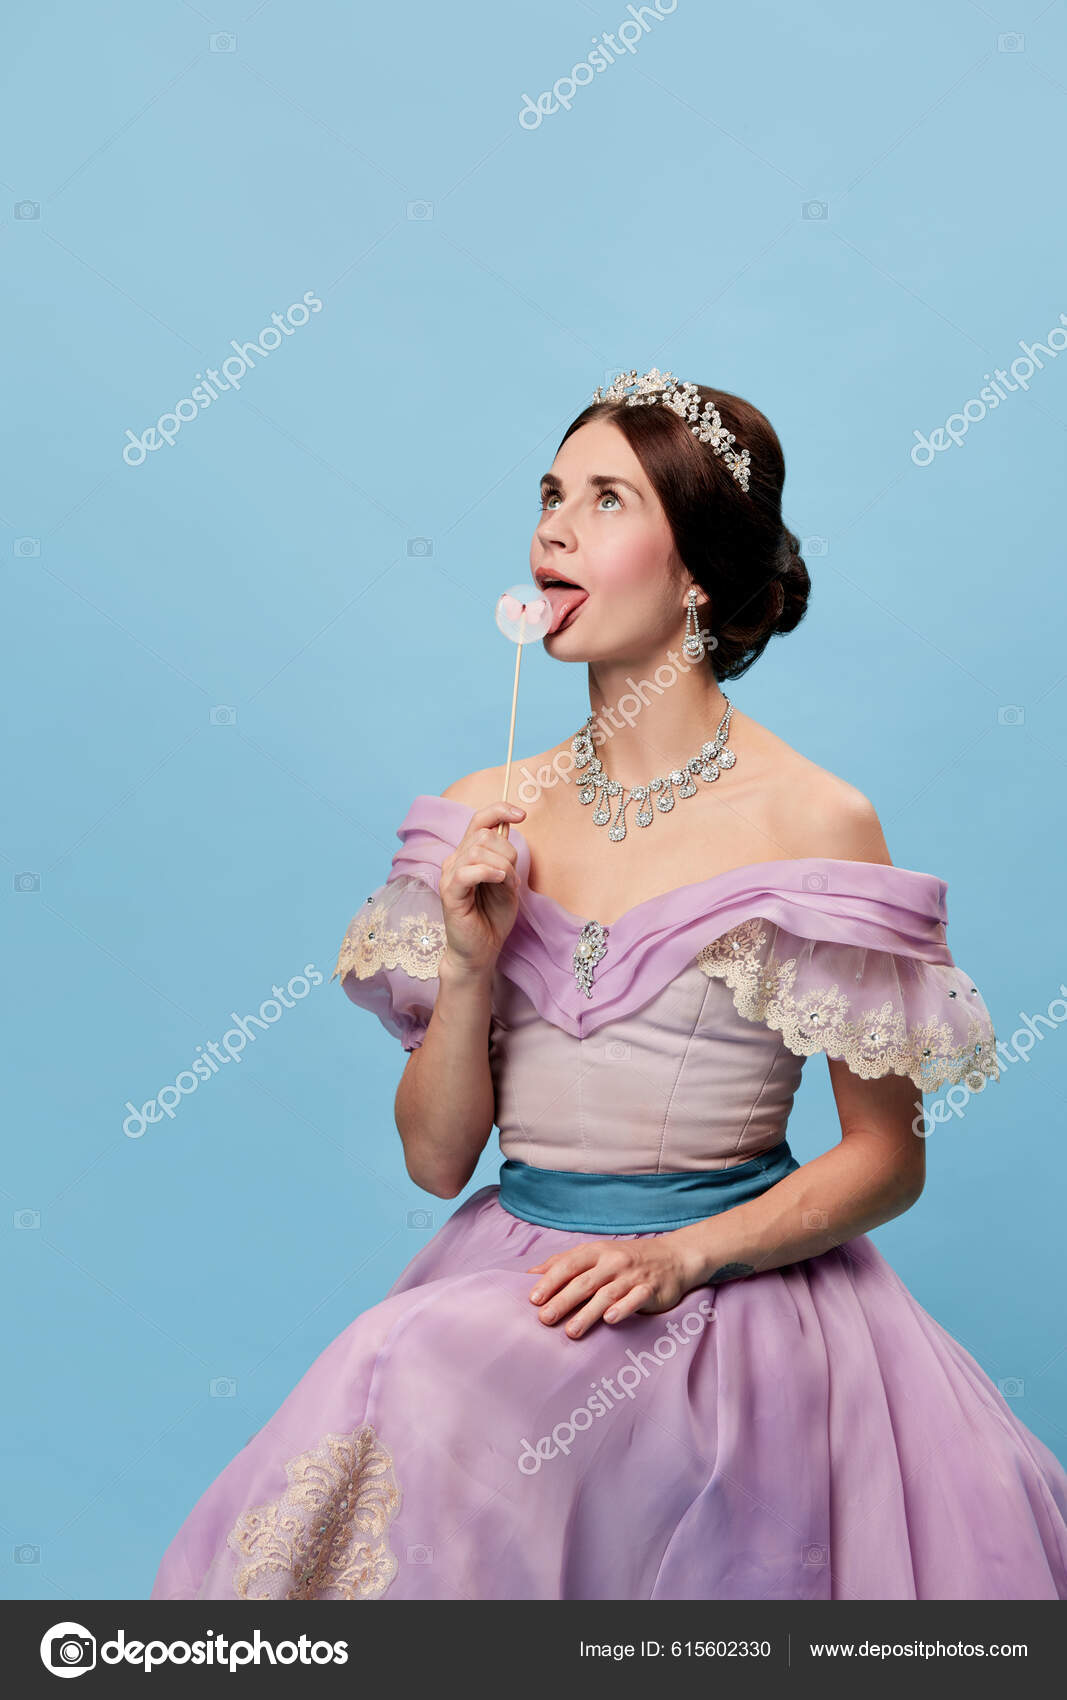 Medieval Woman in Historical Costume Wearing Corset Dress and